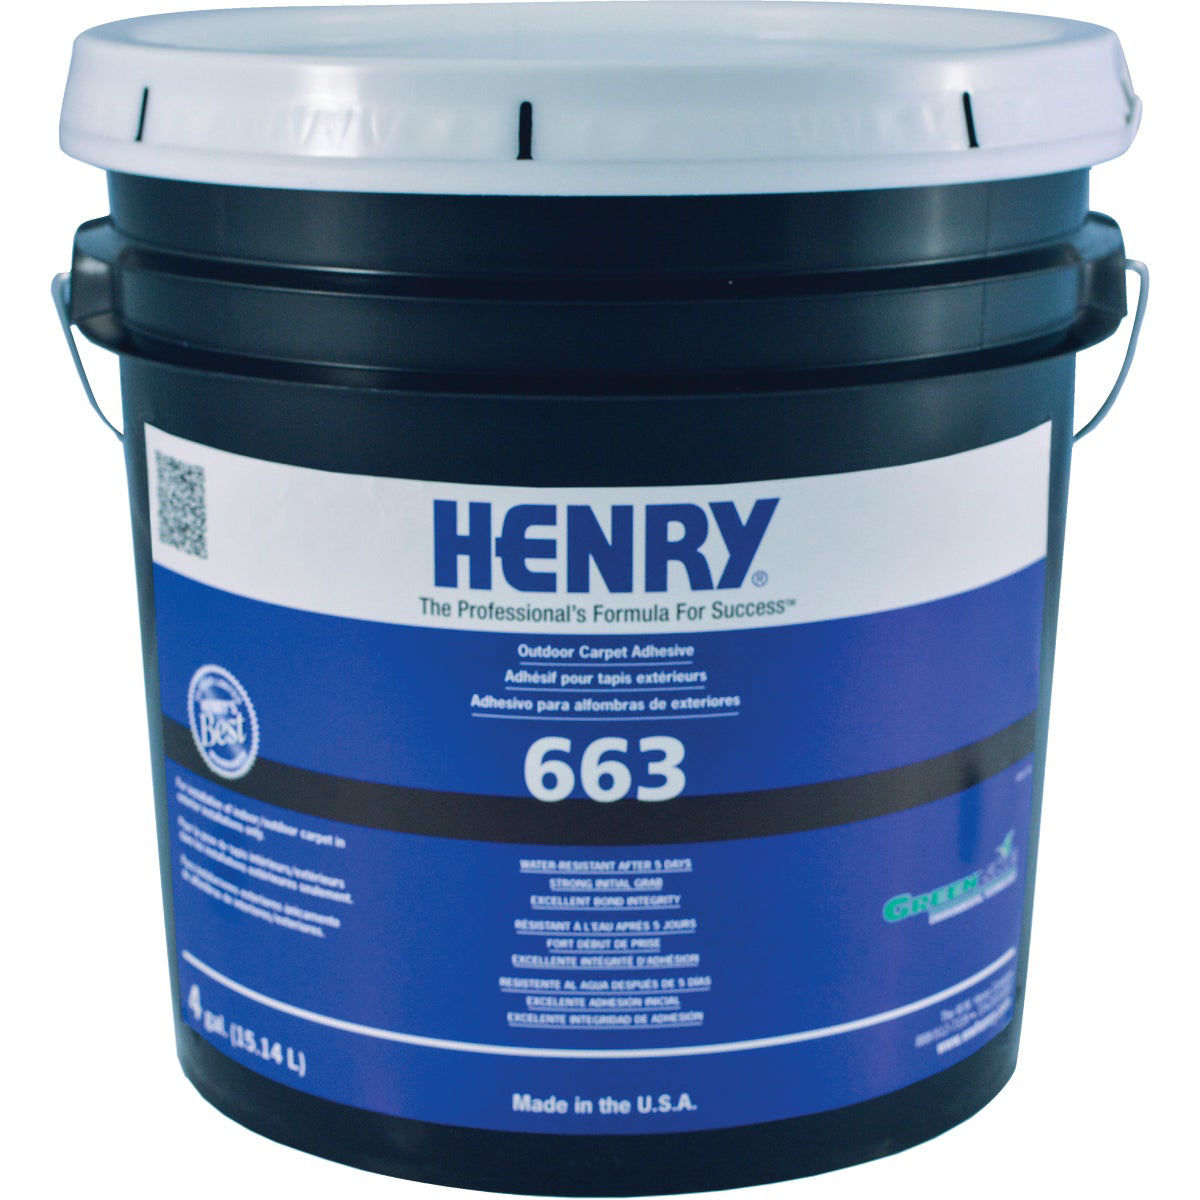 Henry 663 Outdoor Carpet Adhesive, 4 Gal. Pail